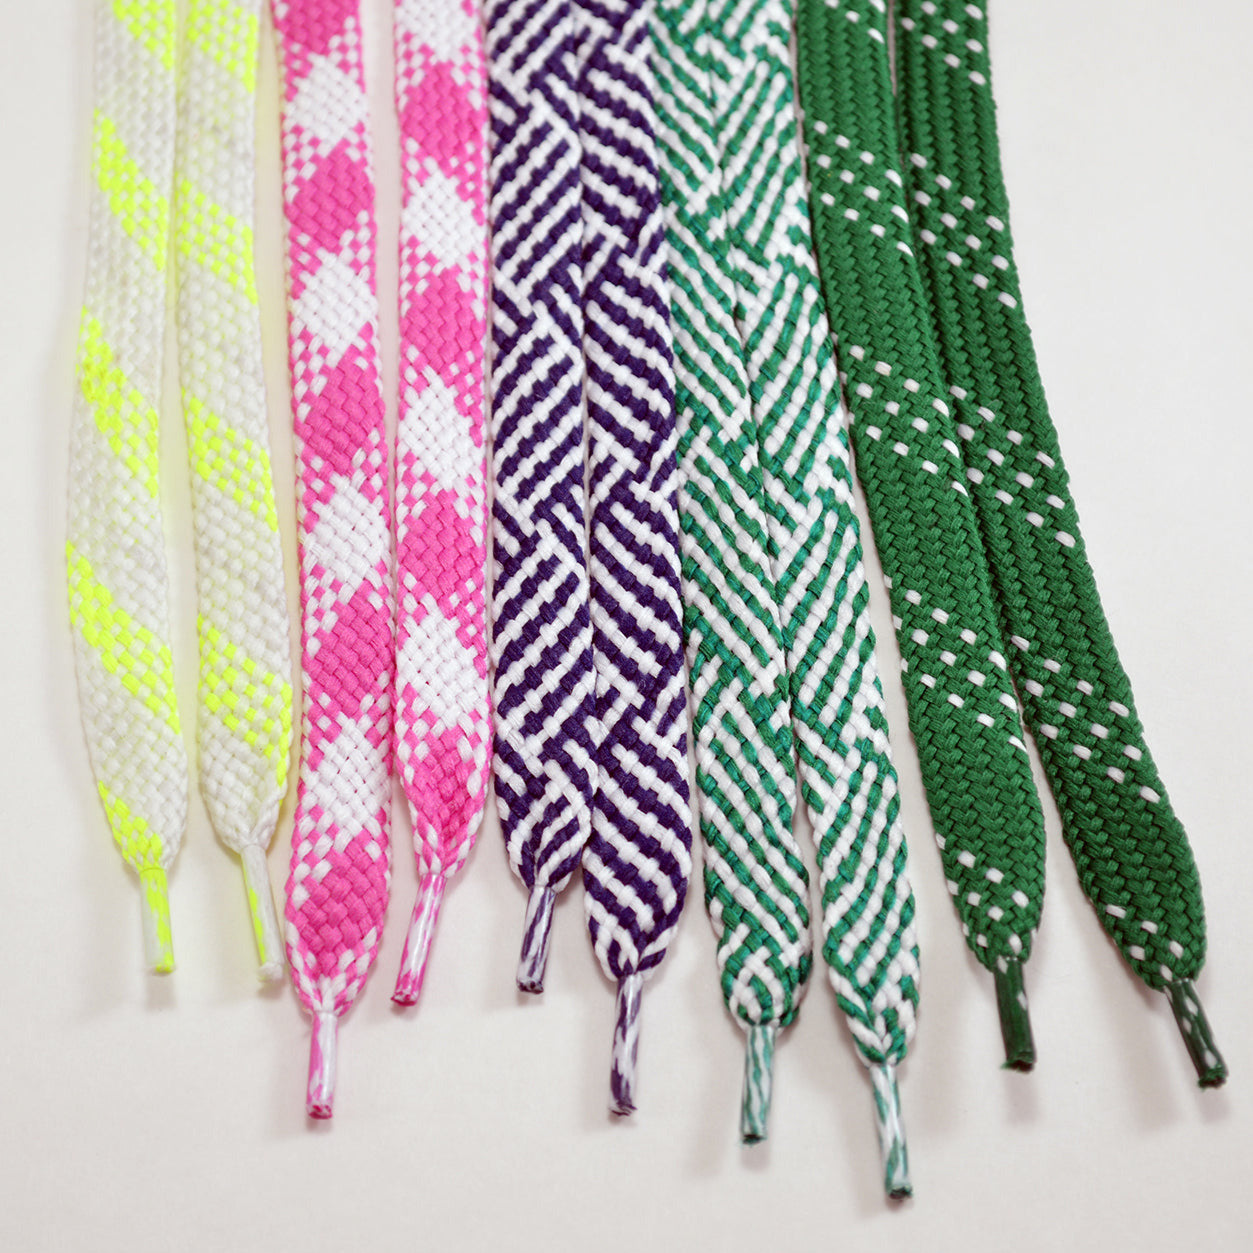 Dashing Golf Shoe Laces Green With White